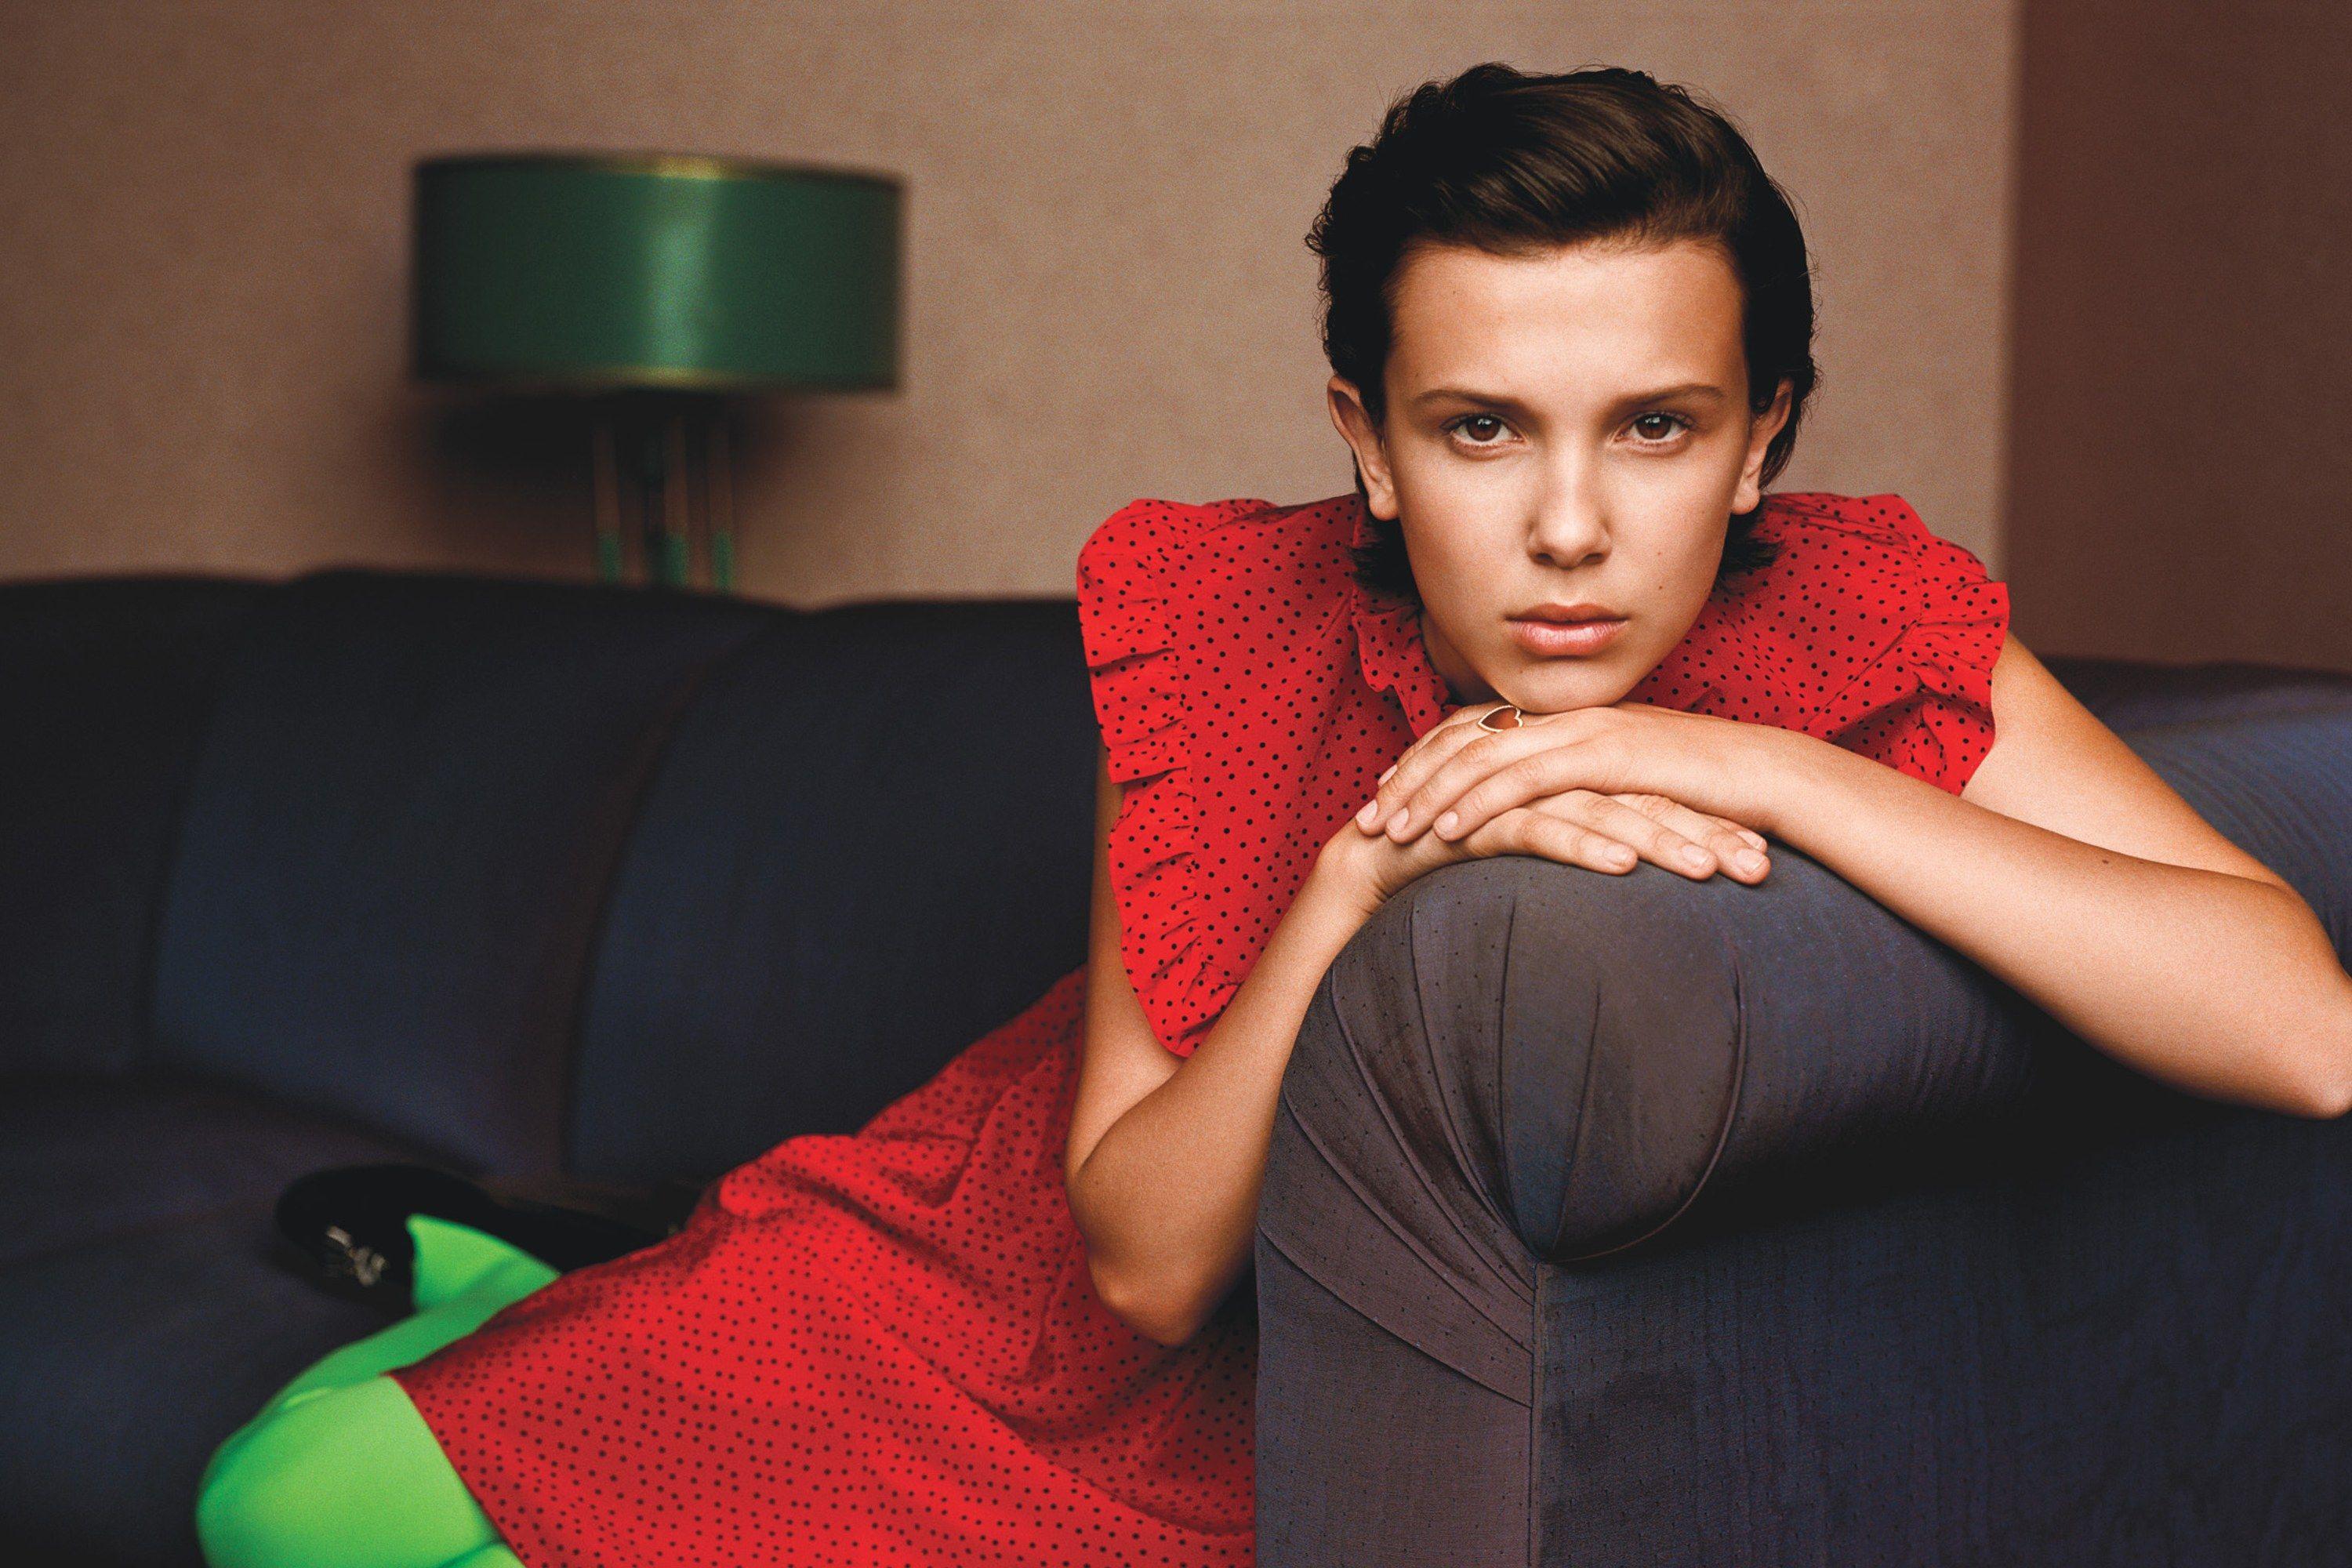 Millie bobby brown background images and wallpapers â yl computing